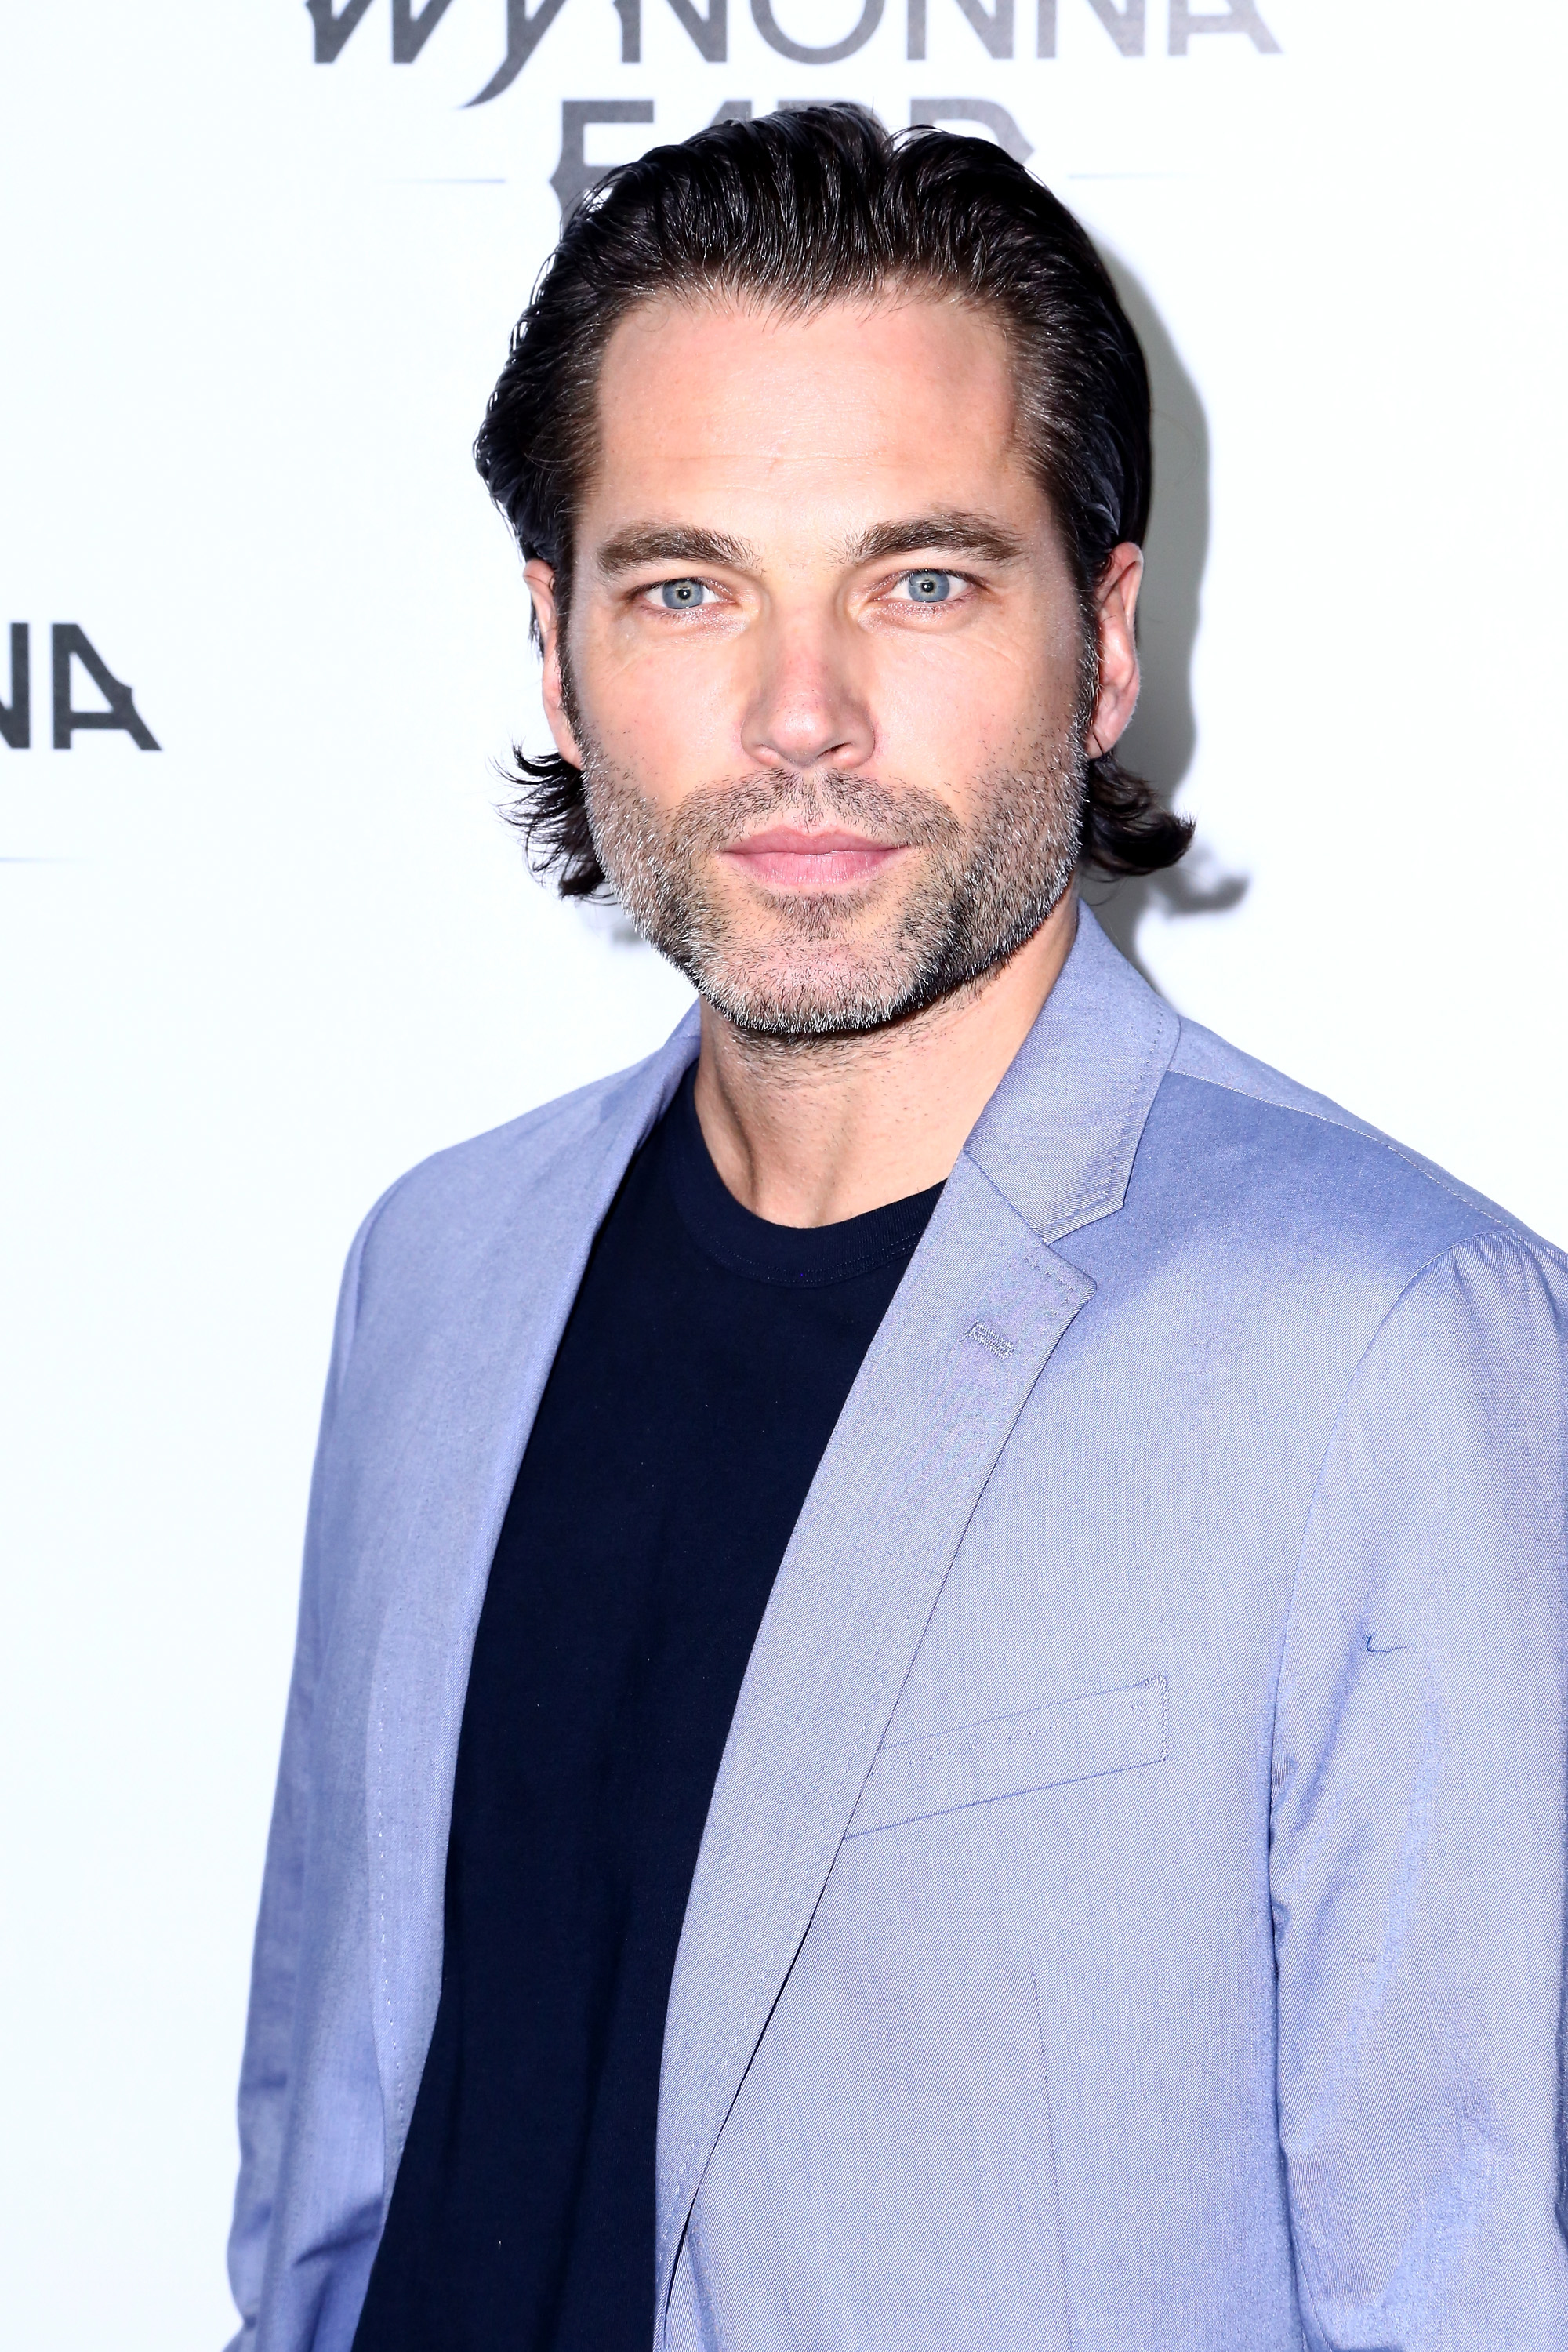 Tim Rozon attends the premiere of "Wynonna Earp" at WonderCon 2016 on March 26, 2016, in Los Angeles, California. | Source: Getty Images